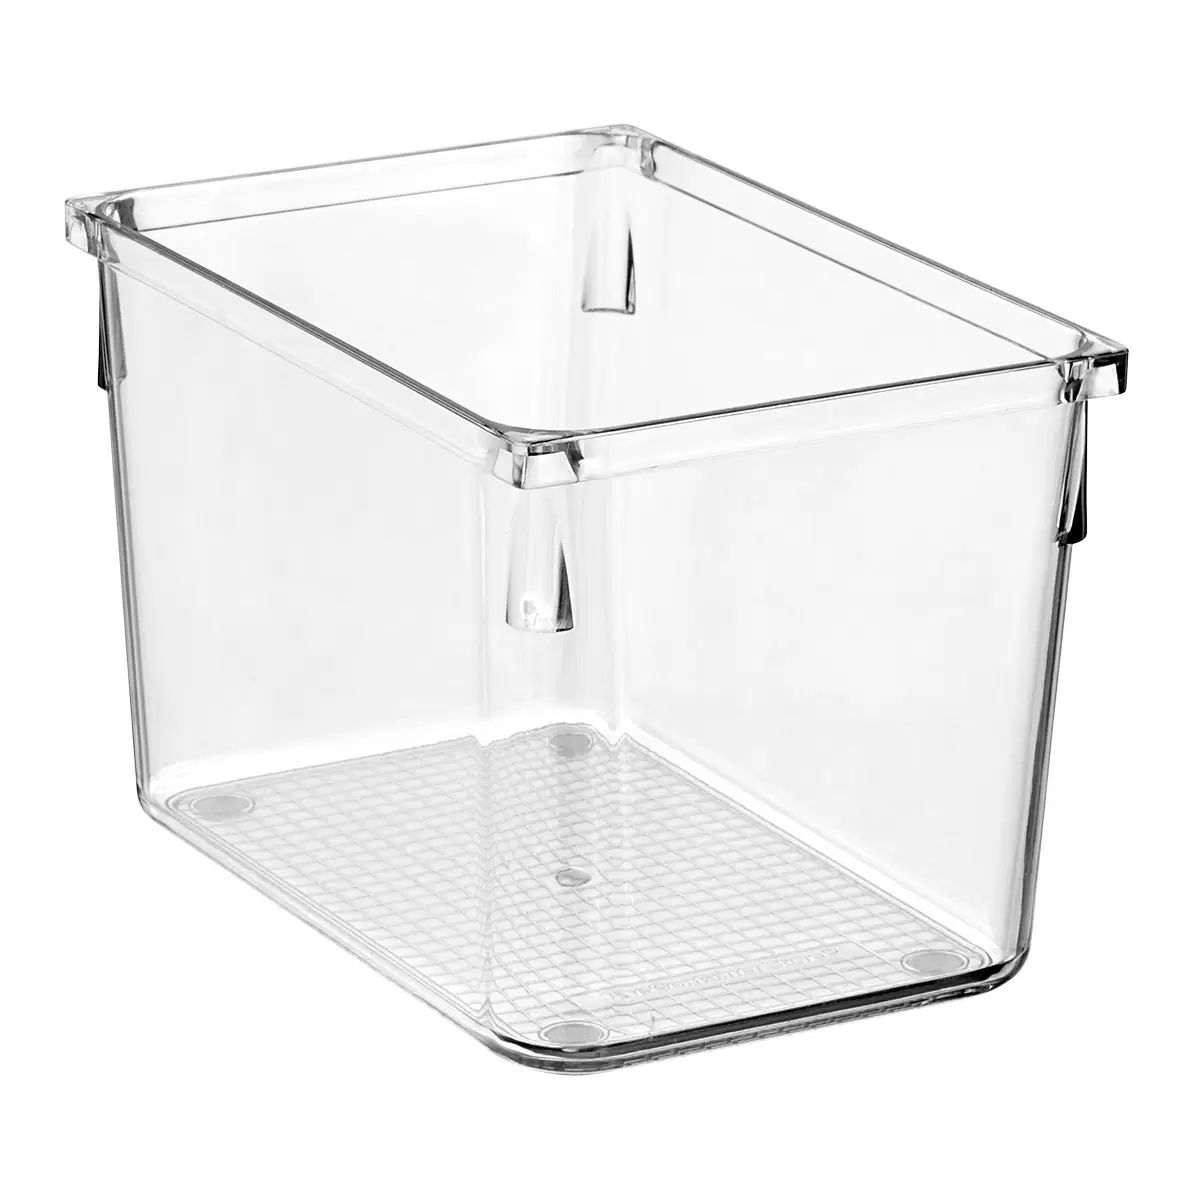 Everything Organizer Deep Drawer Organizer Clear | The Container Store